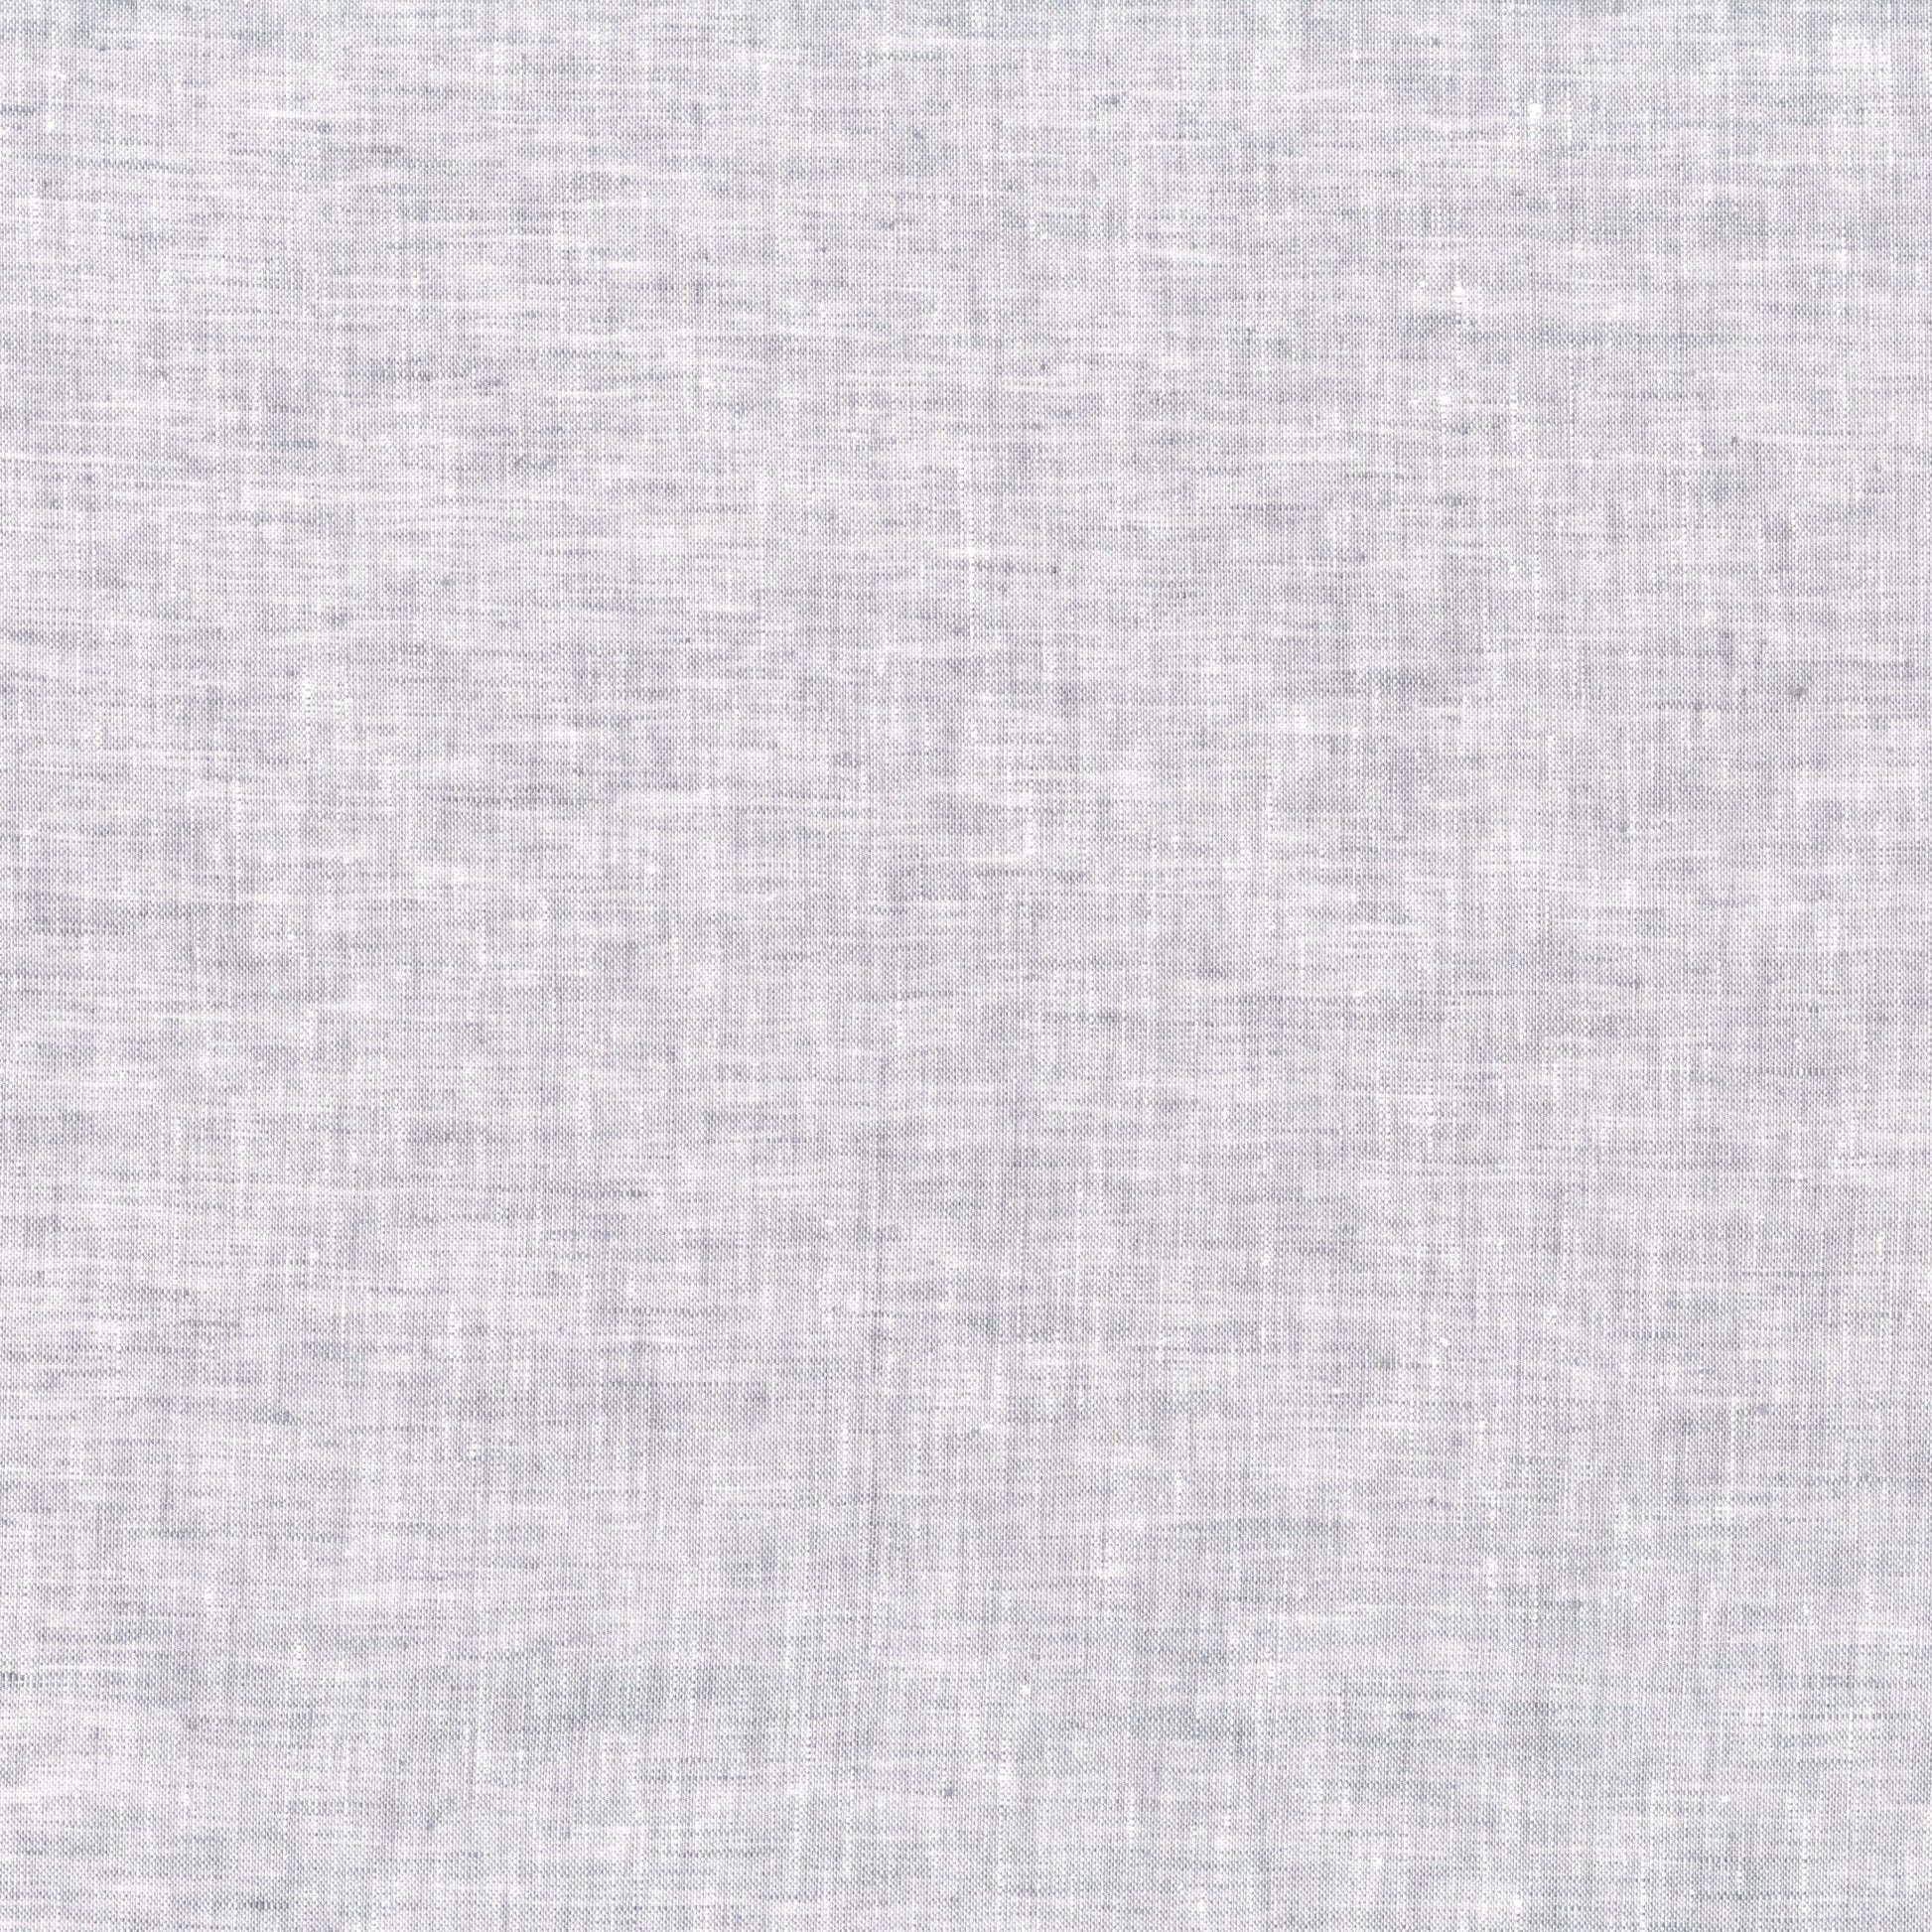 Nantucket Blue and Gray Linen Crib Bedding Swatches - New Arrivals Inc